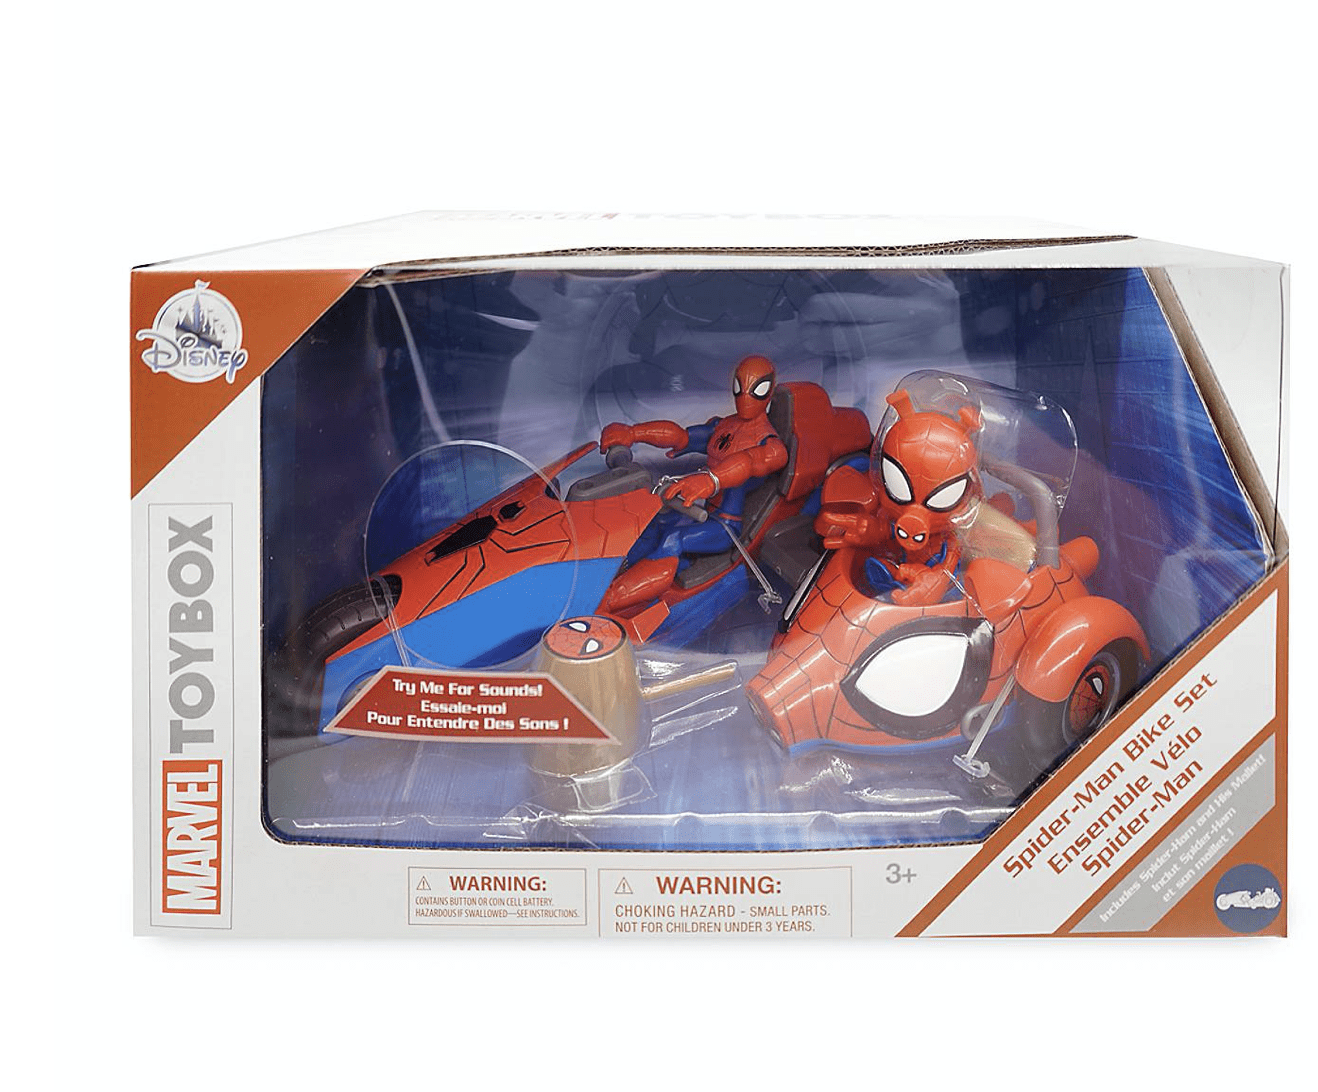 Spider Man Homecoming Spider Racer Car Vehicle Action Figure Set Box Xmas Gift 